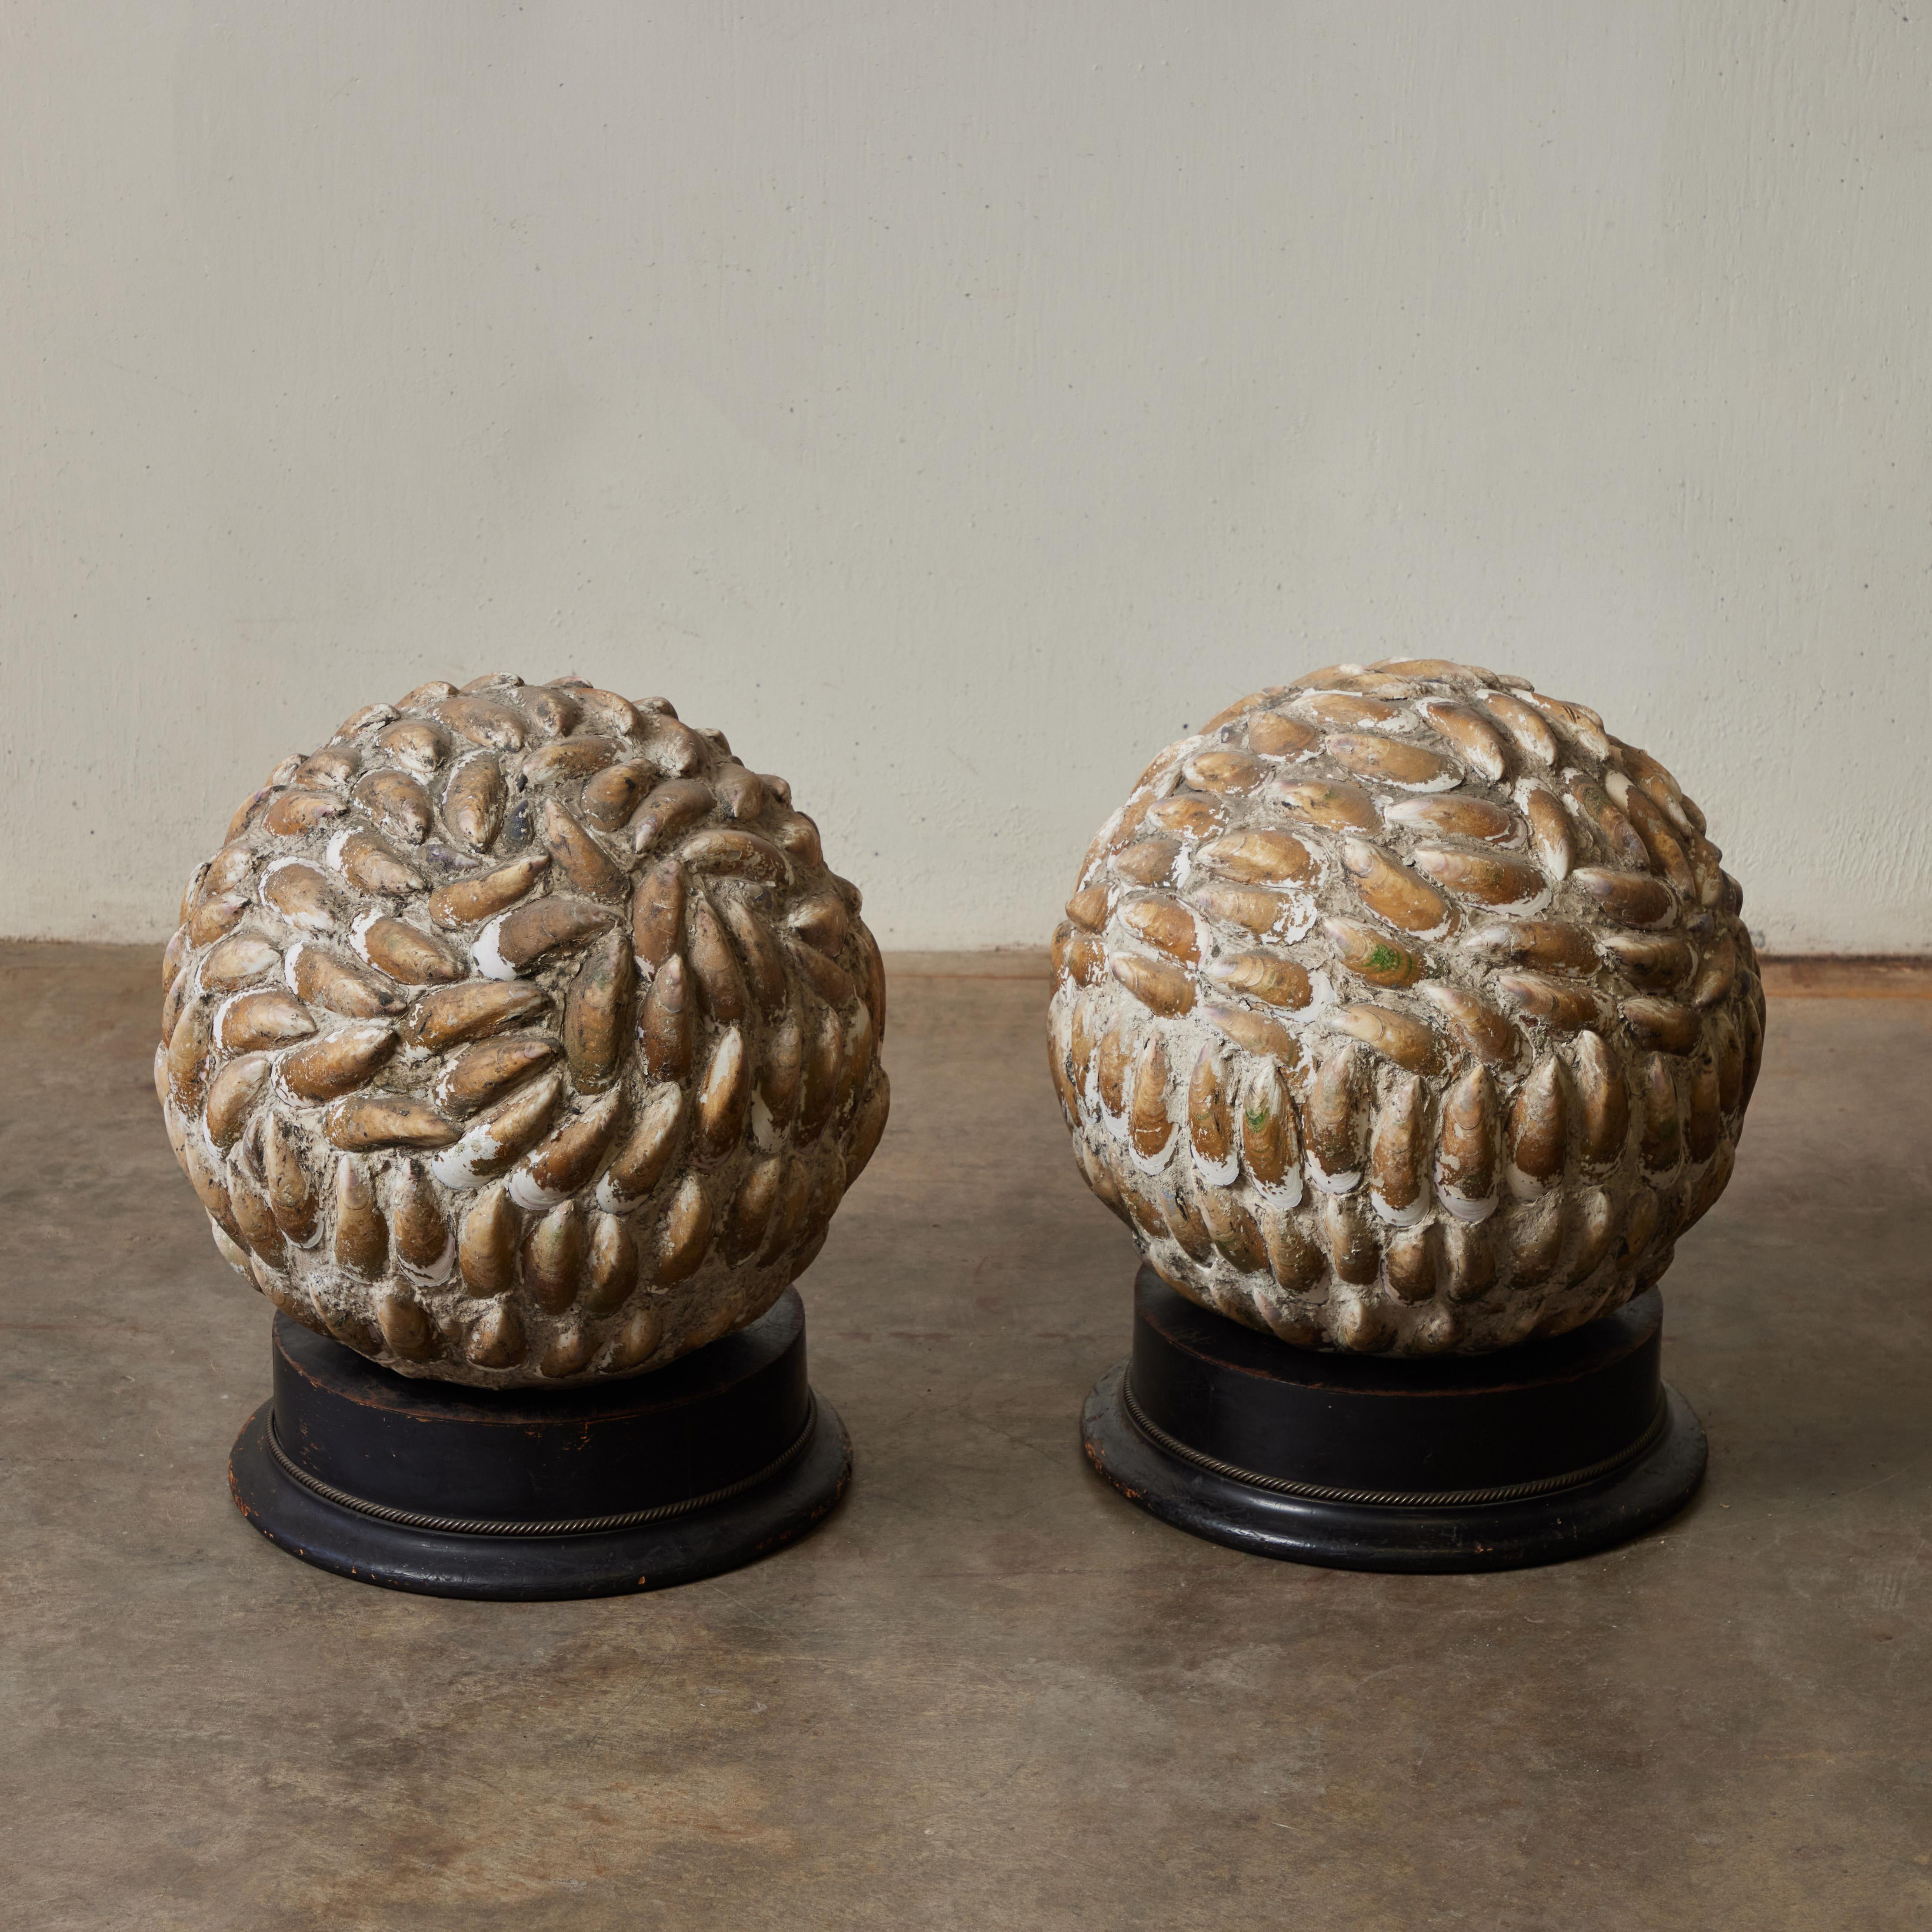 Pair of beautiful sphere-shaped sculptures from 1920s England. Featuring a rhythmic pattern of mussel shells and mounted on round ebonized plinths, the pair adds a naturalistic touch to a table or shelf-scape. 

England c.1920.

Dimensions: 18W